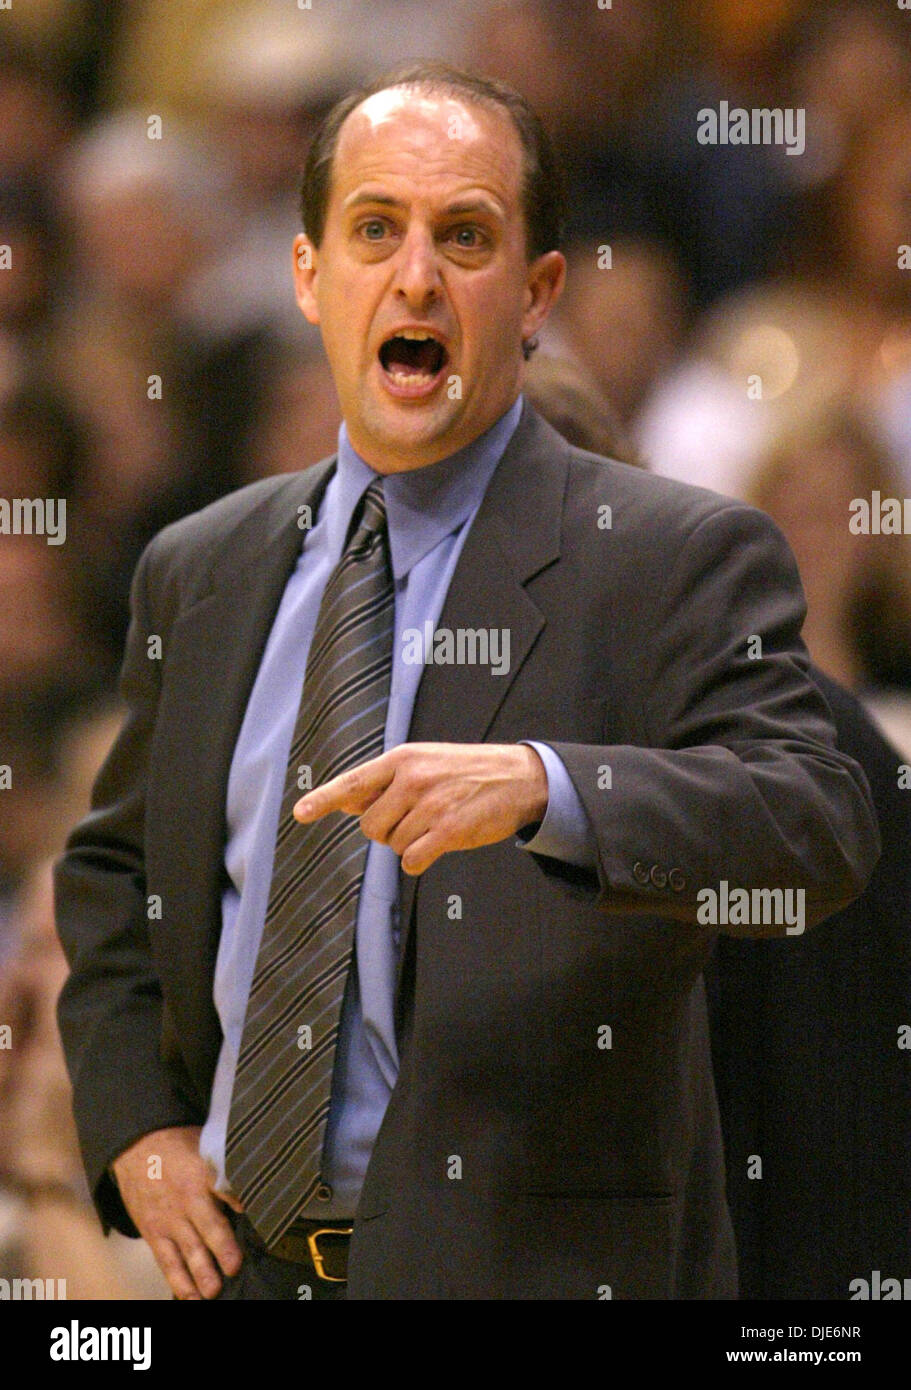 Apr 28, 2004; Los Angeles, CA, USA; Houston Rockets head coach JEFF VAN GUNDY reacts after the LA Lakers eliminated the Houston Rockets off the first round playoff basketball game. The Lakers defeated the Rockets 97-78 taking the series 4-1. Lakers will play the San Antonio Spurs in the conference semi finals. Stock Photo